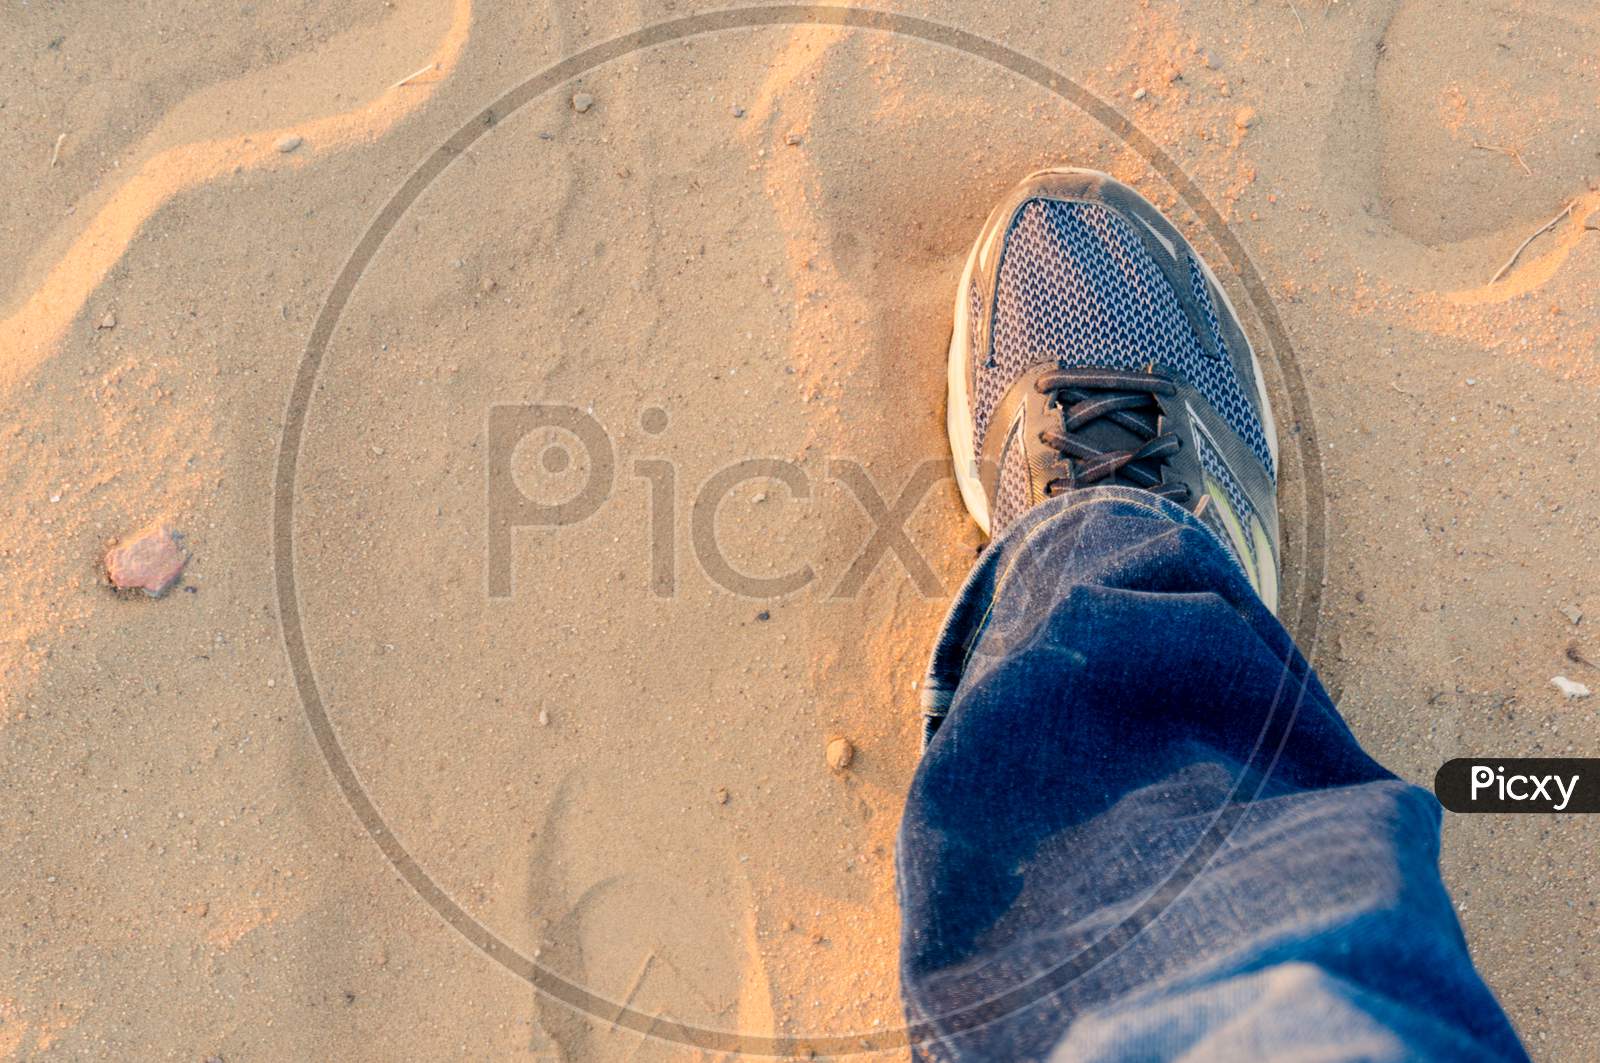 Top Down View Of Man Extending A Foot With A Worn Sneaker Jeans On Dusty Sand Showing Travel And Trekking During Evening As Sunlight Bounces Off It